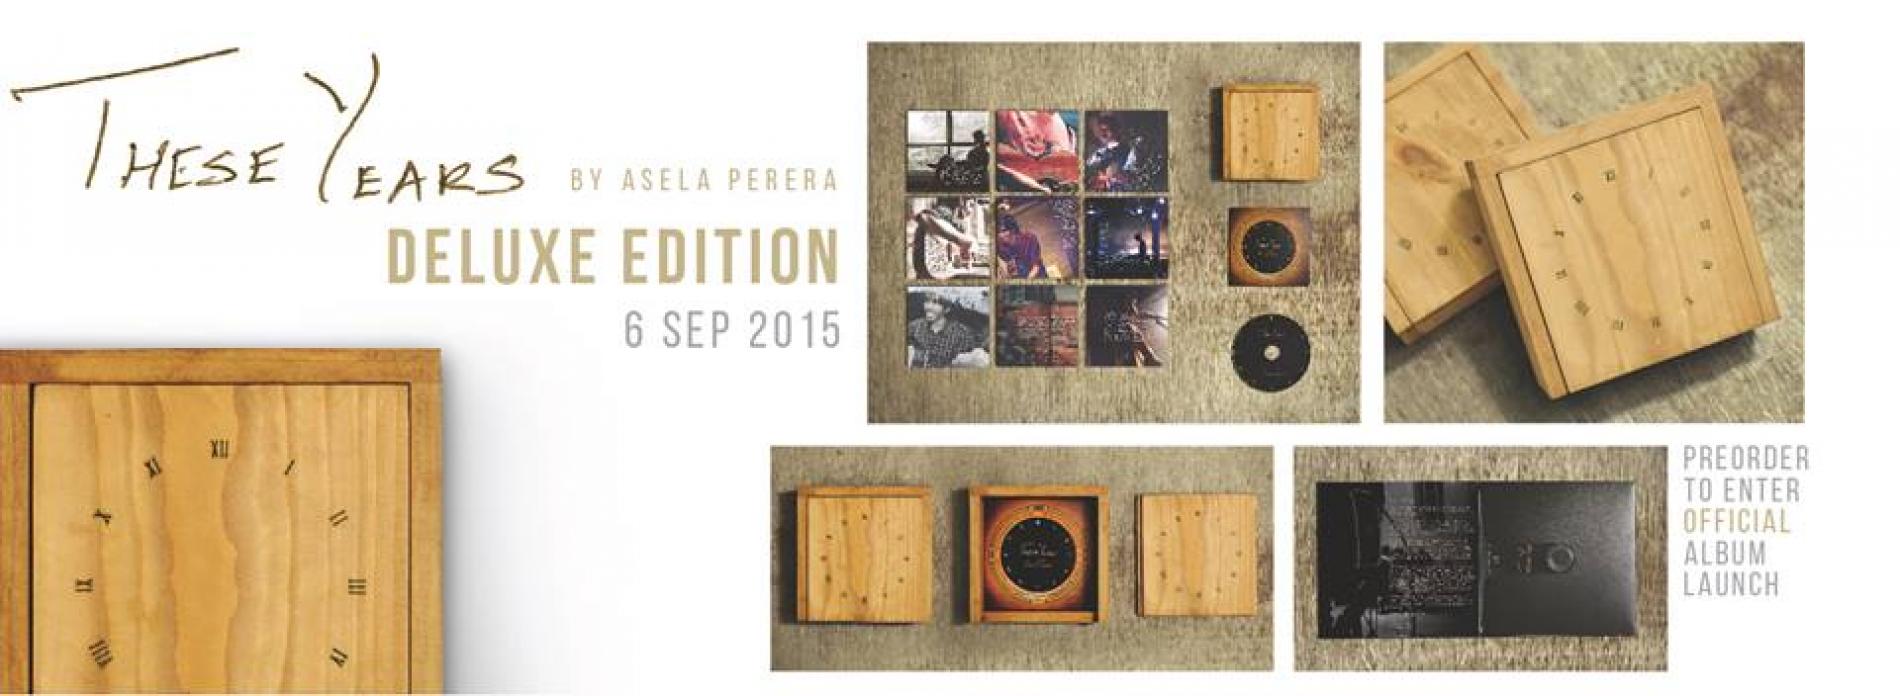 Pre-Order Your Copy Of “These Years” By Asela Perera